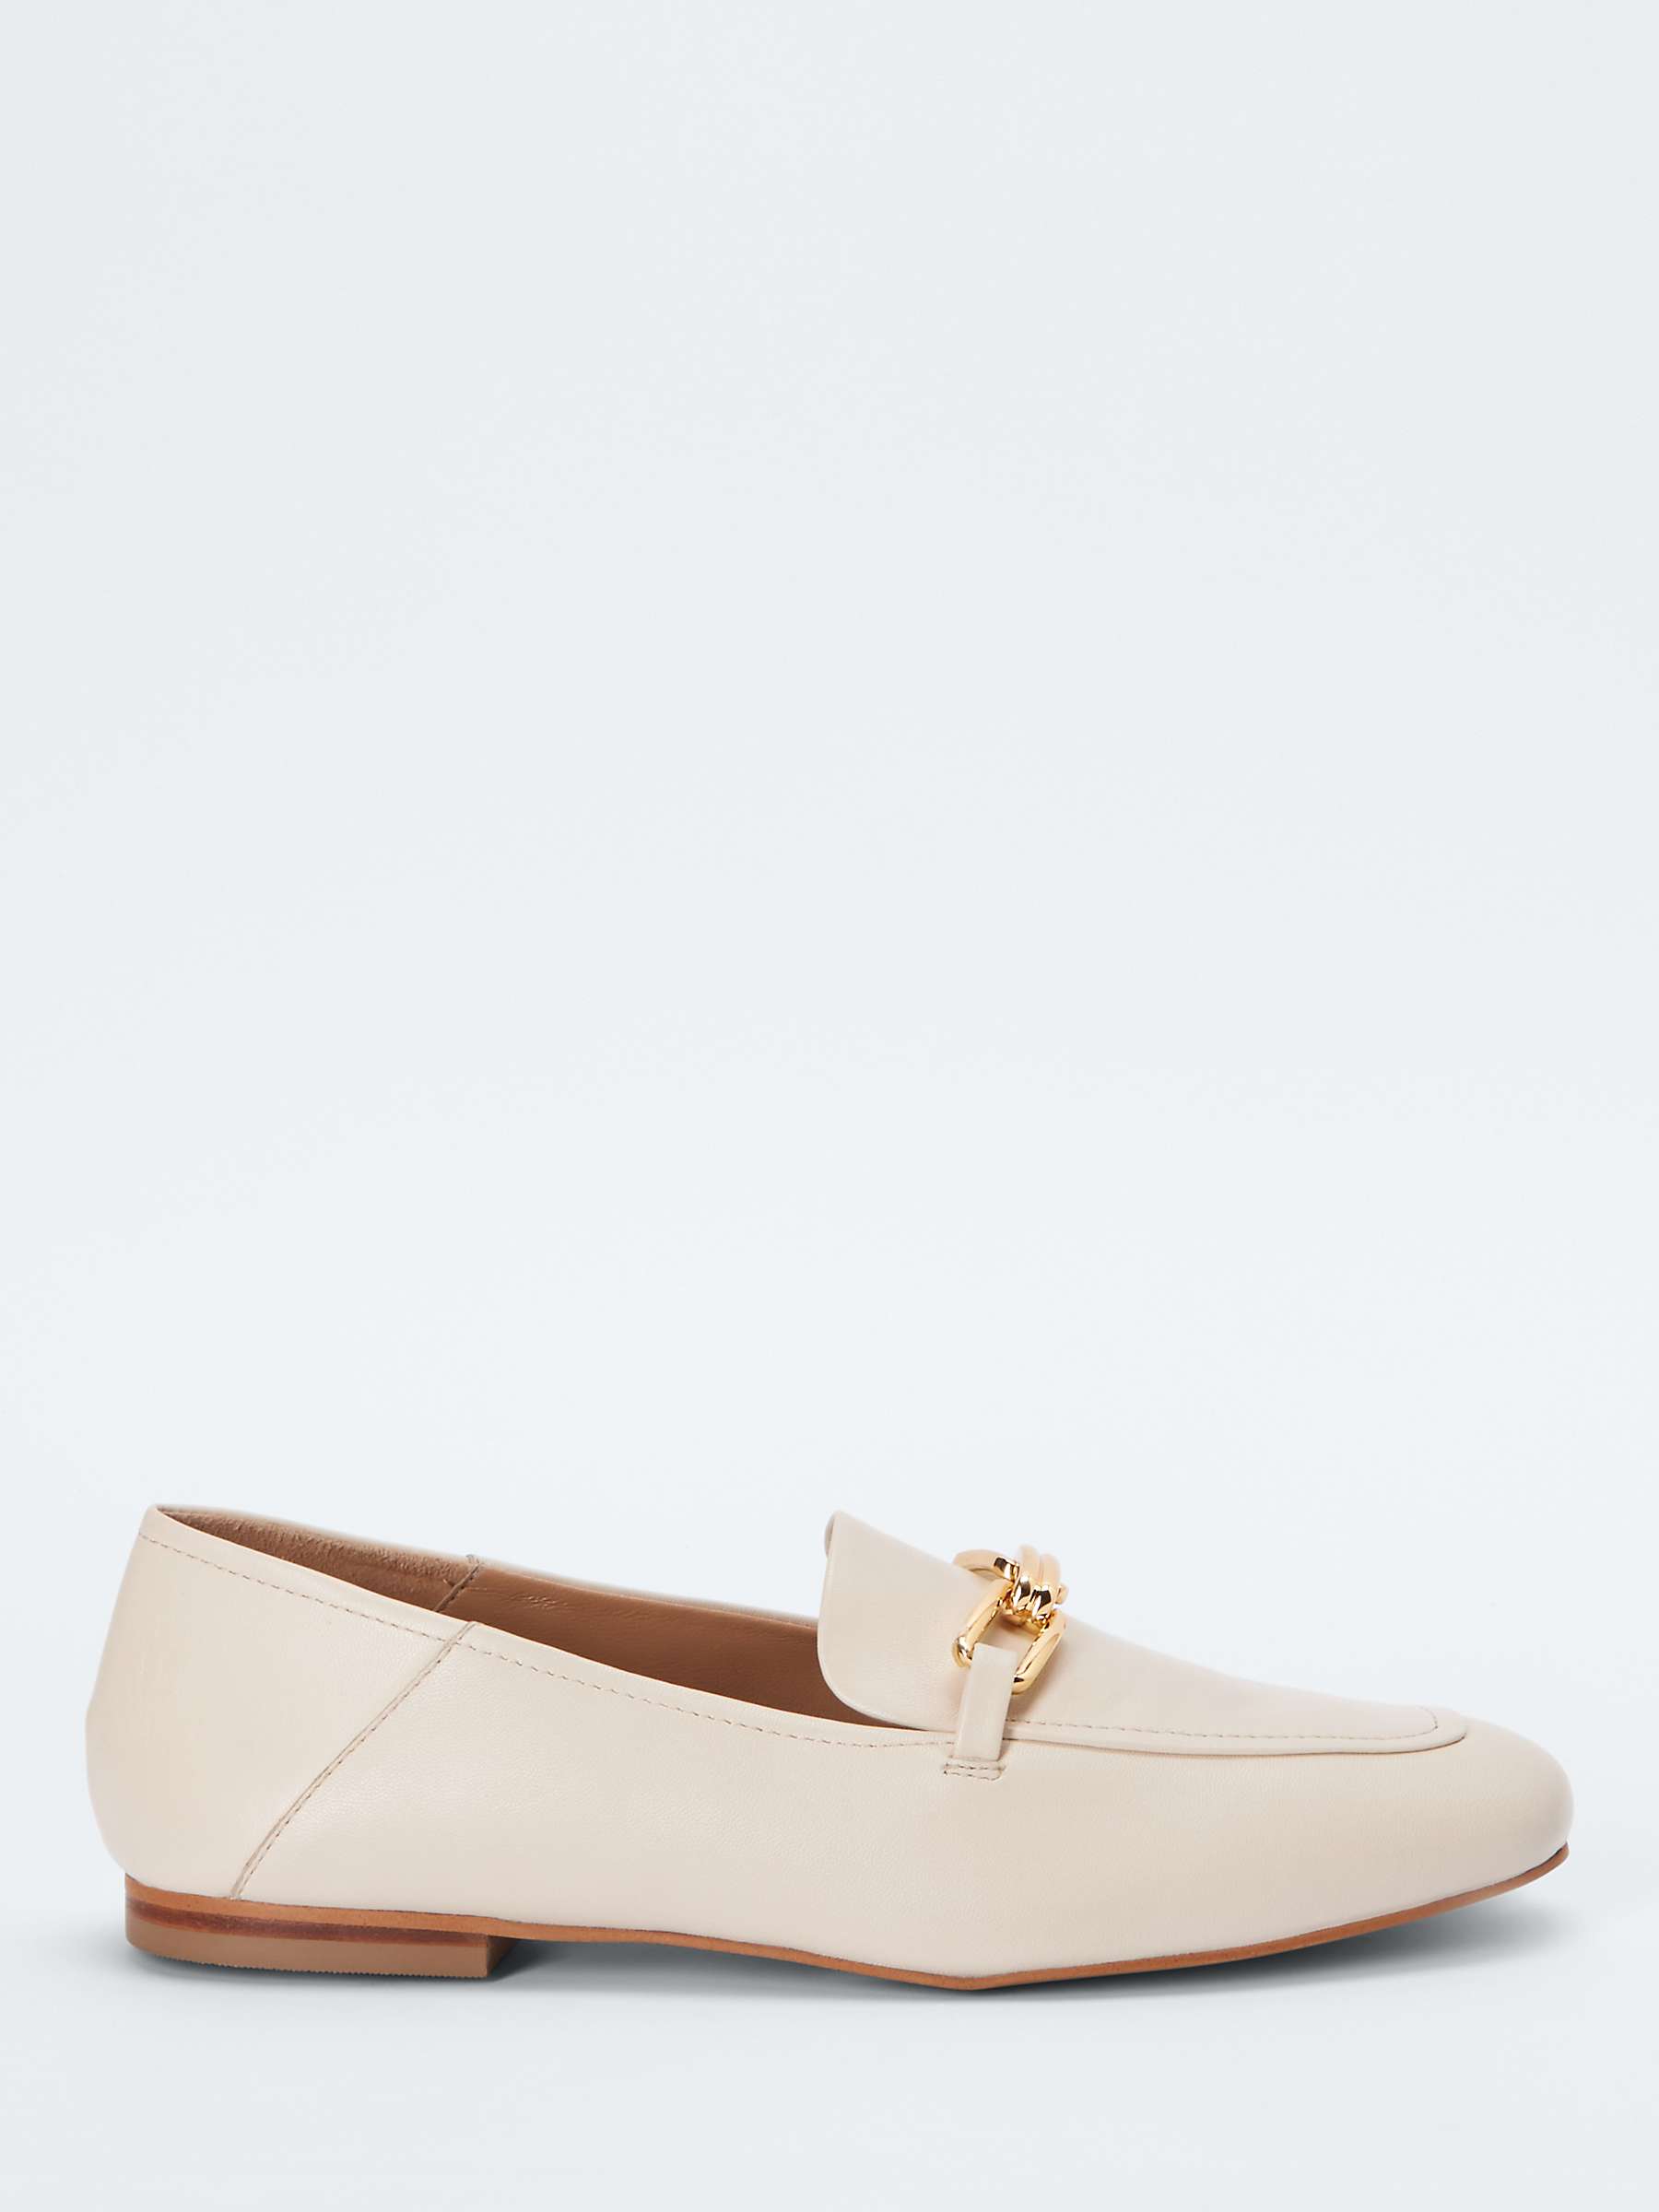 Buy John Lewis Godfrey Leather Soft Back Chain Trim Loafers Online at johnlewis.com